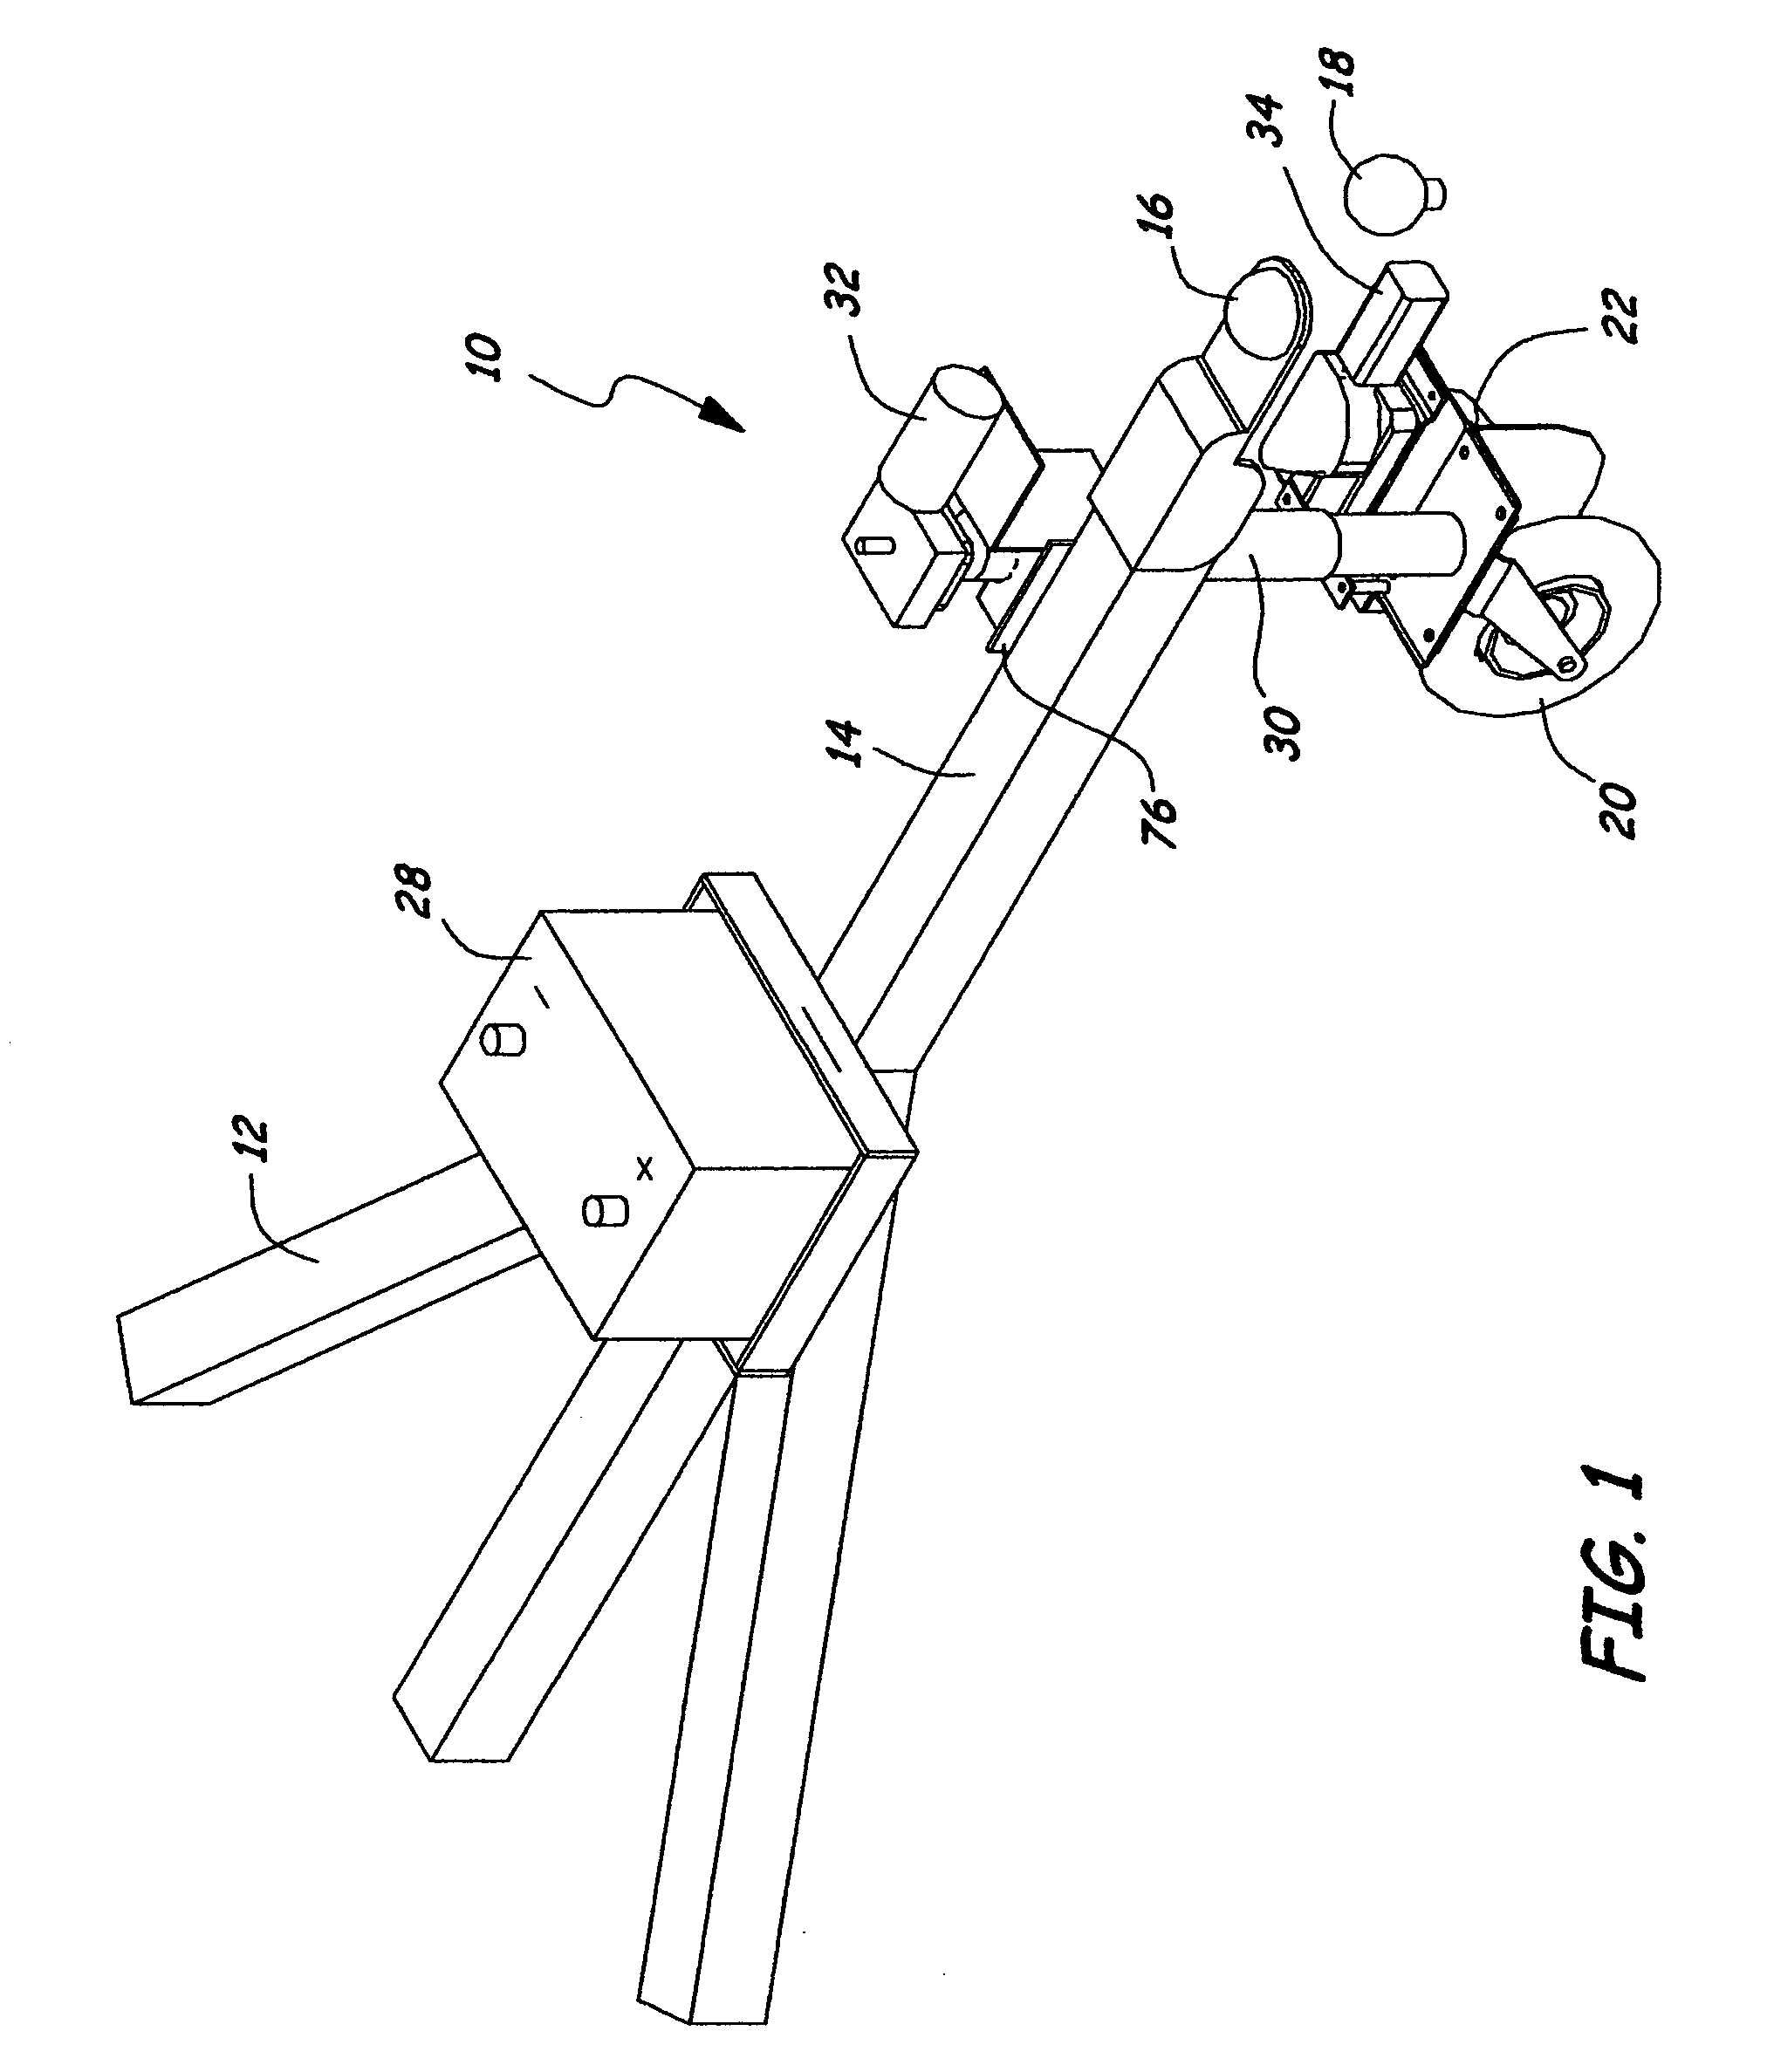 Drive mechanism for trailer